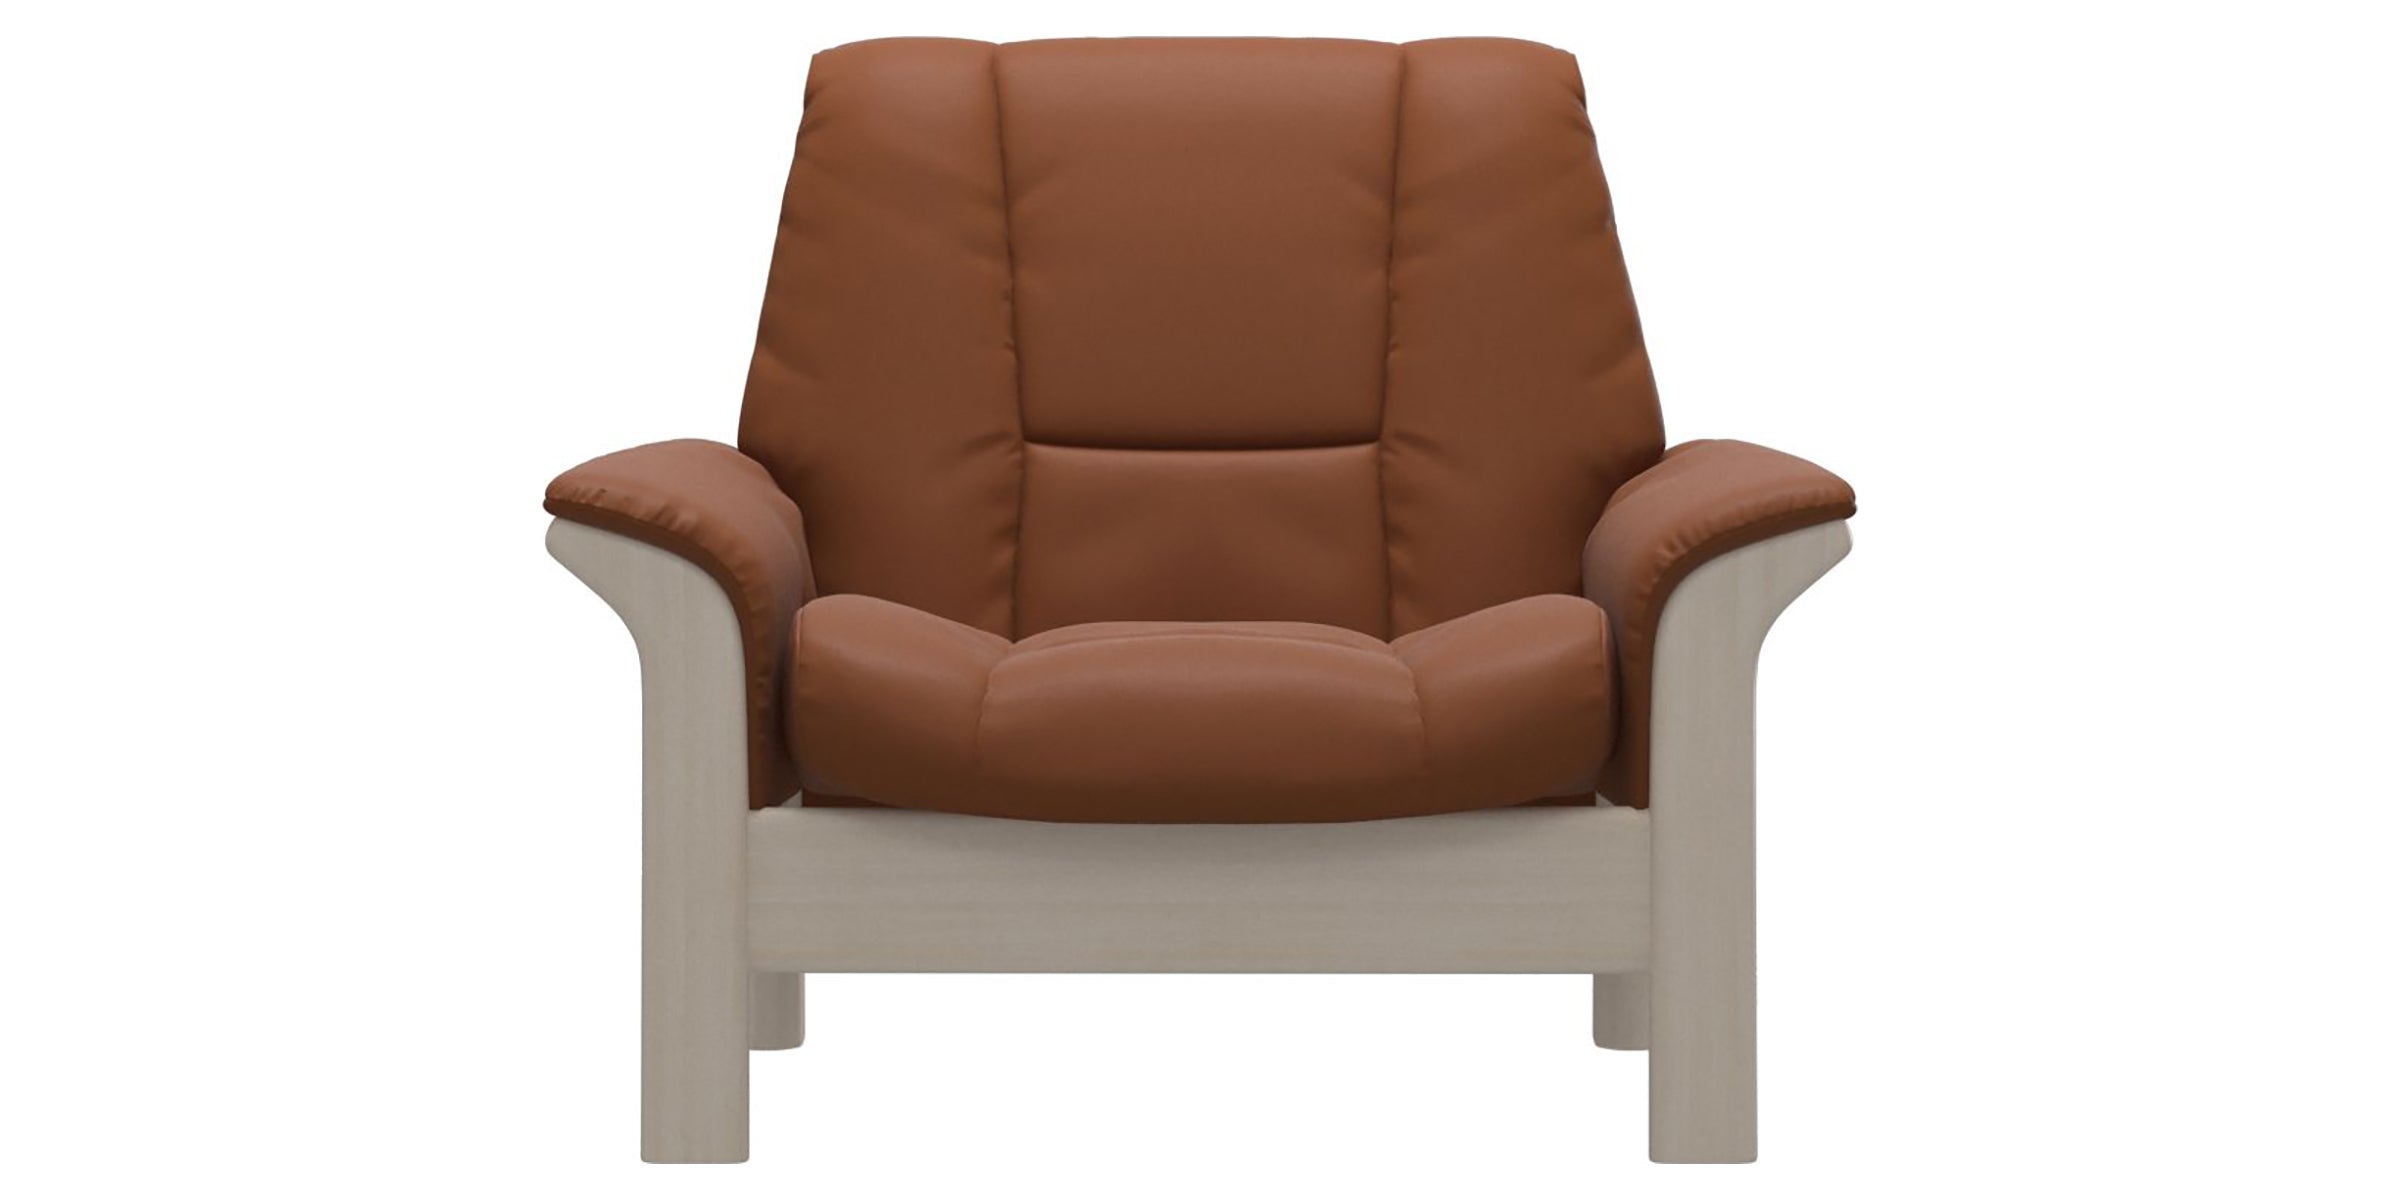 Paloma Leather New Cognac and Whitewash Base | Stressless Buckingham Low Back Chair | Valley Ridge Furniture